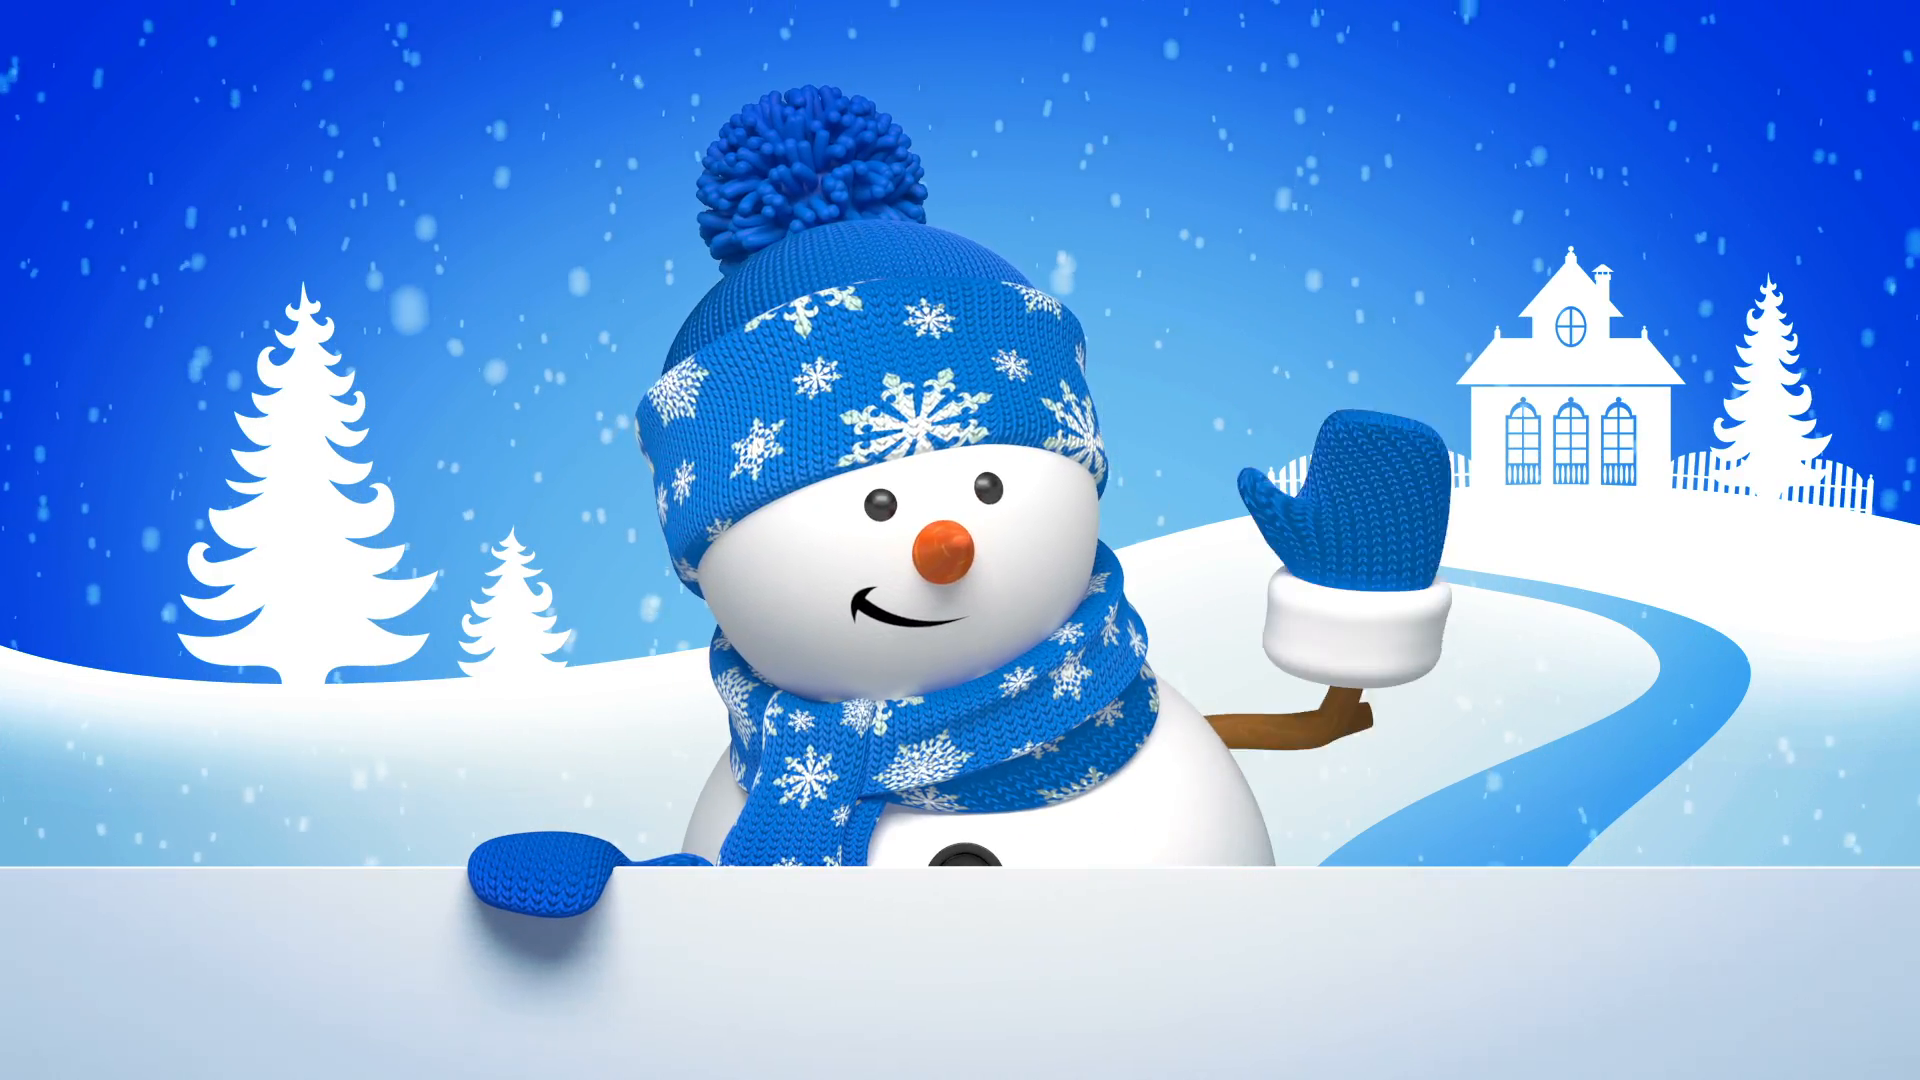 Merry Christmas Snowman Wallpapers Wallpaper Cave